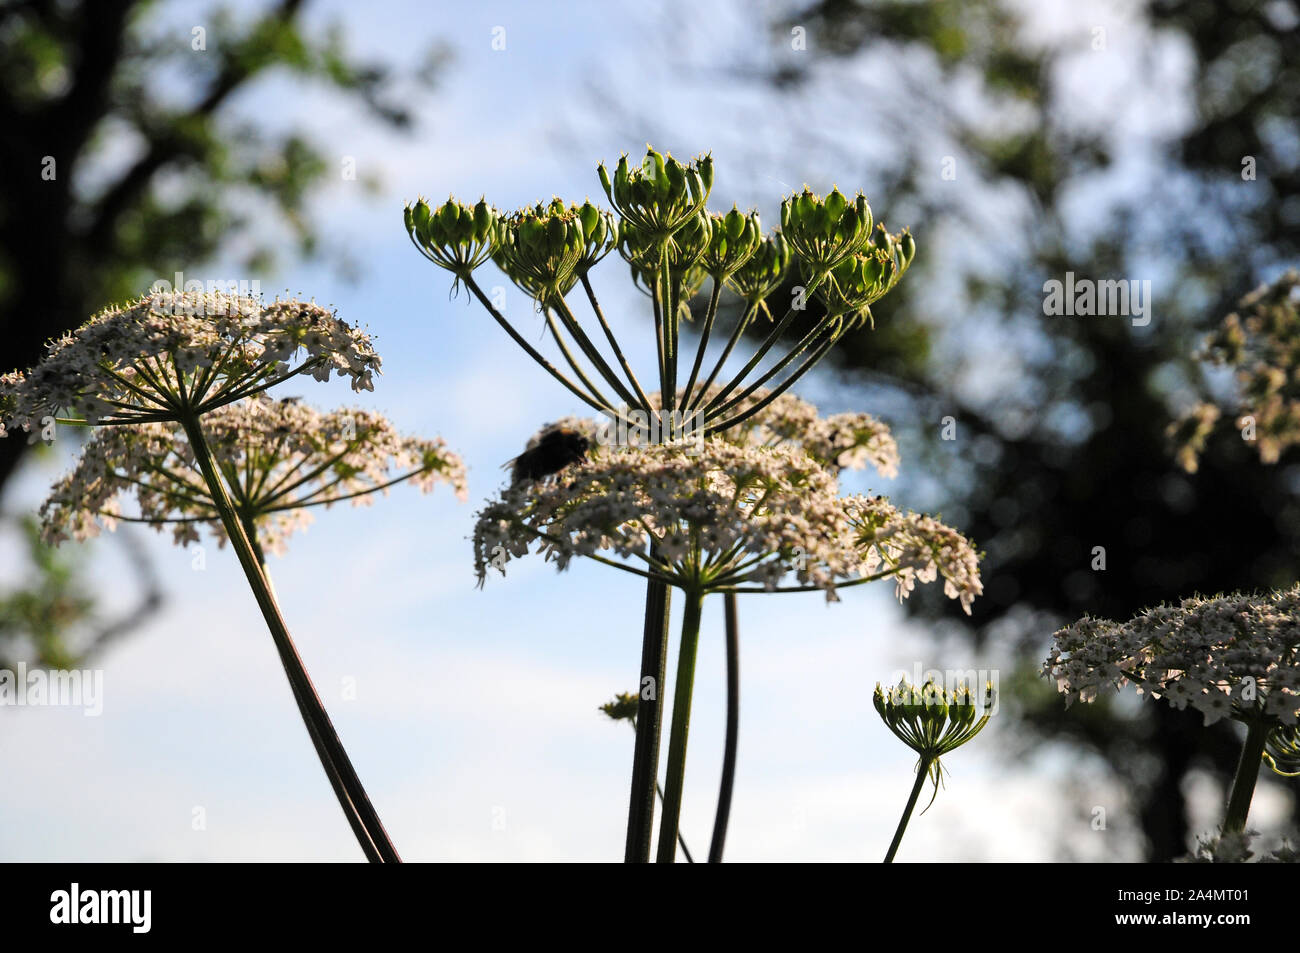 Seed heads and flowers of Hogweed  Heracleum sphondylium against the light. Stock Photo